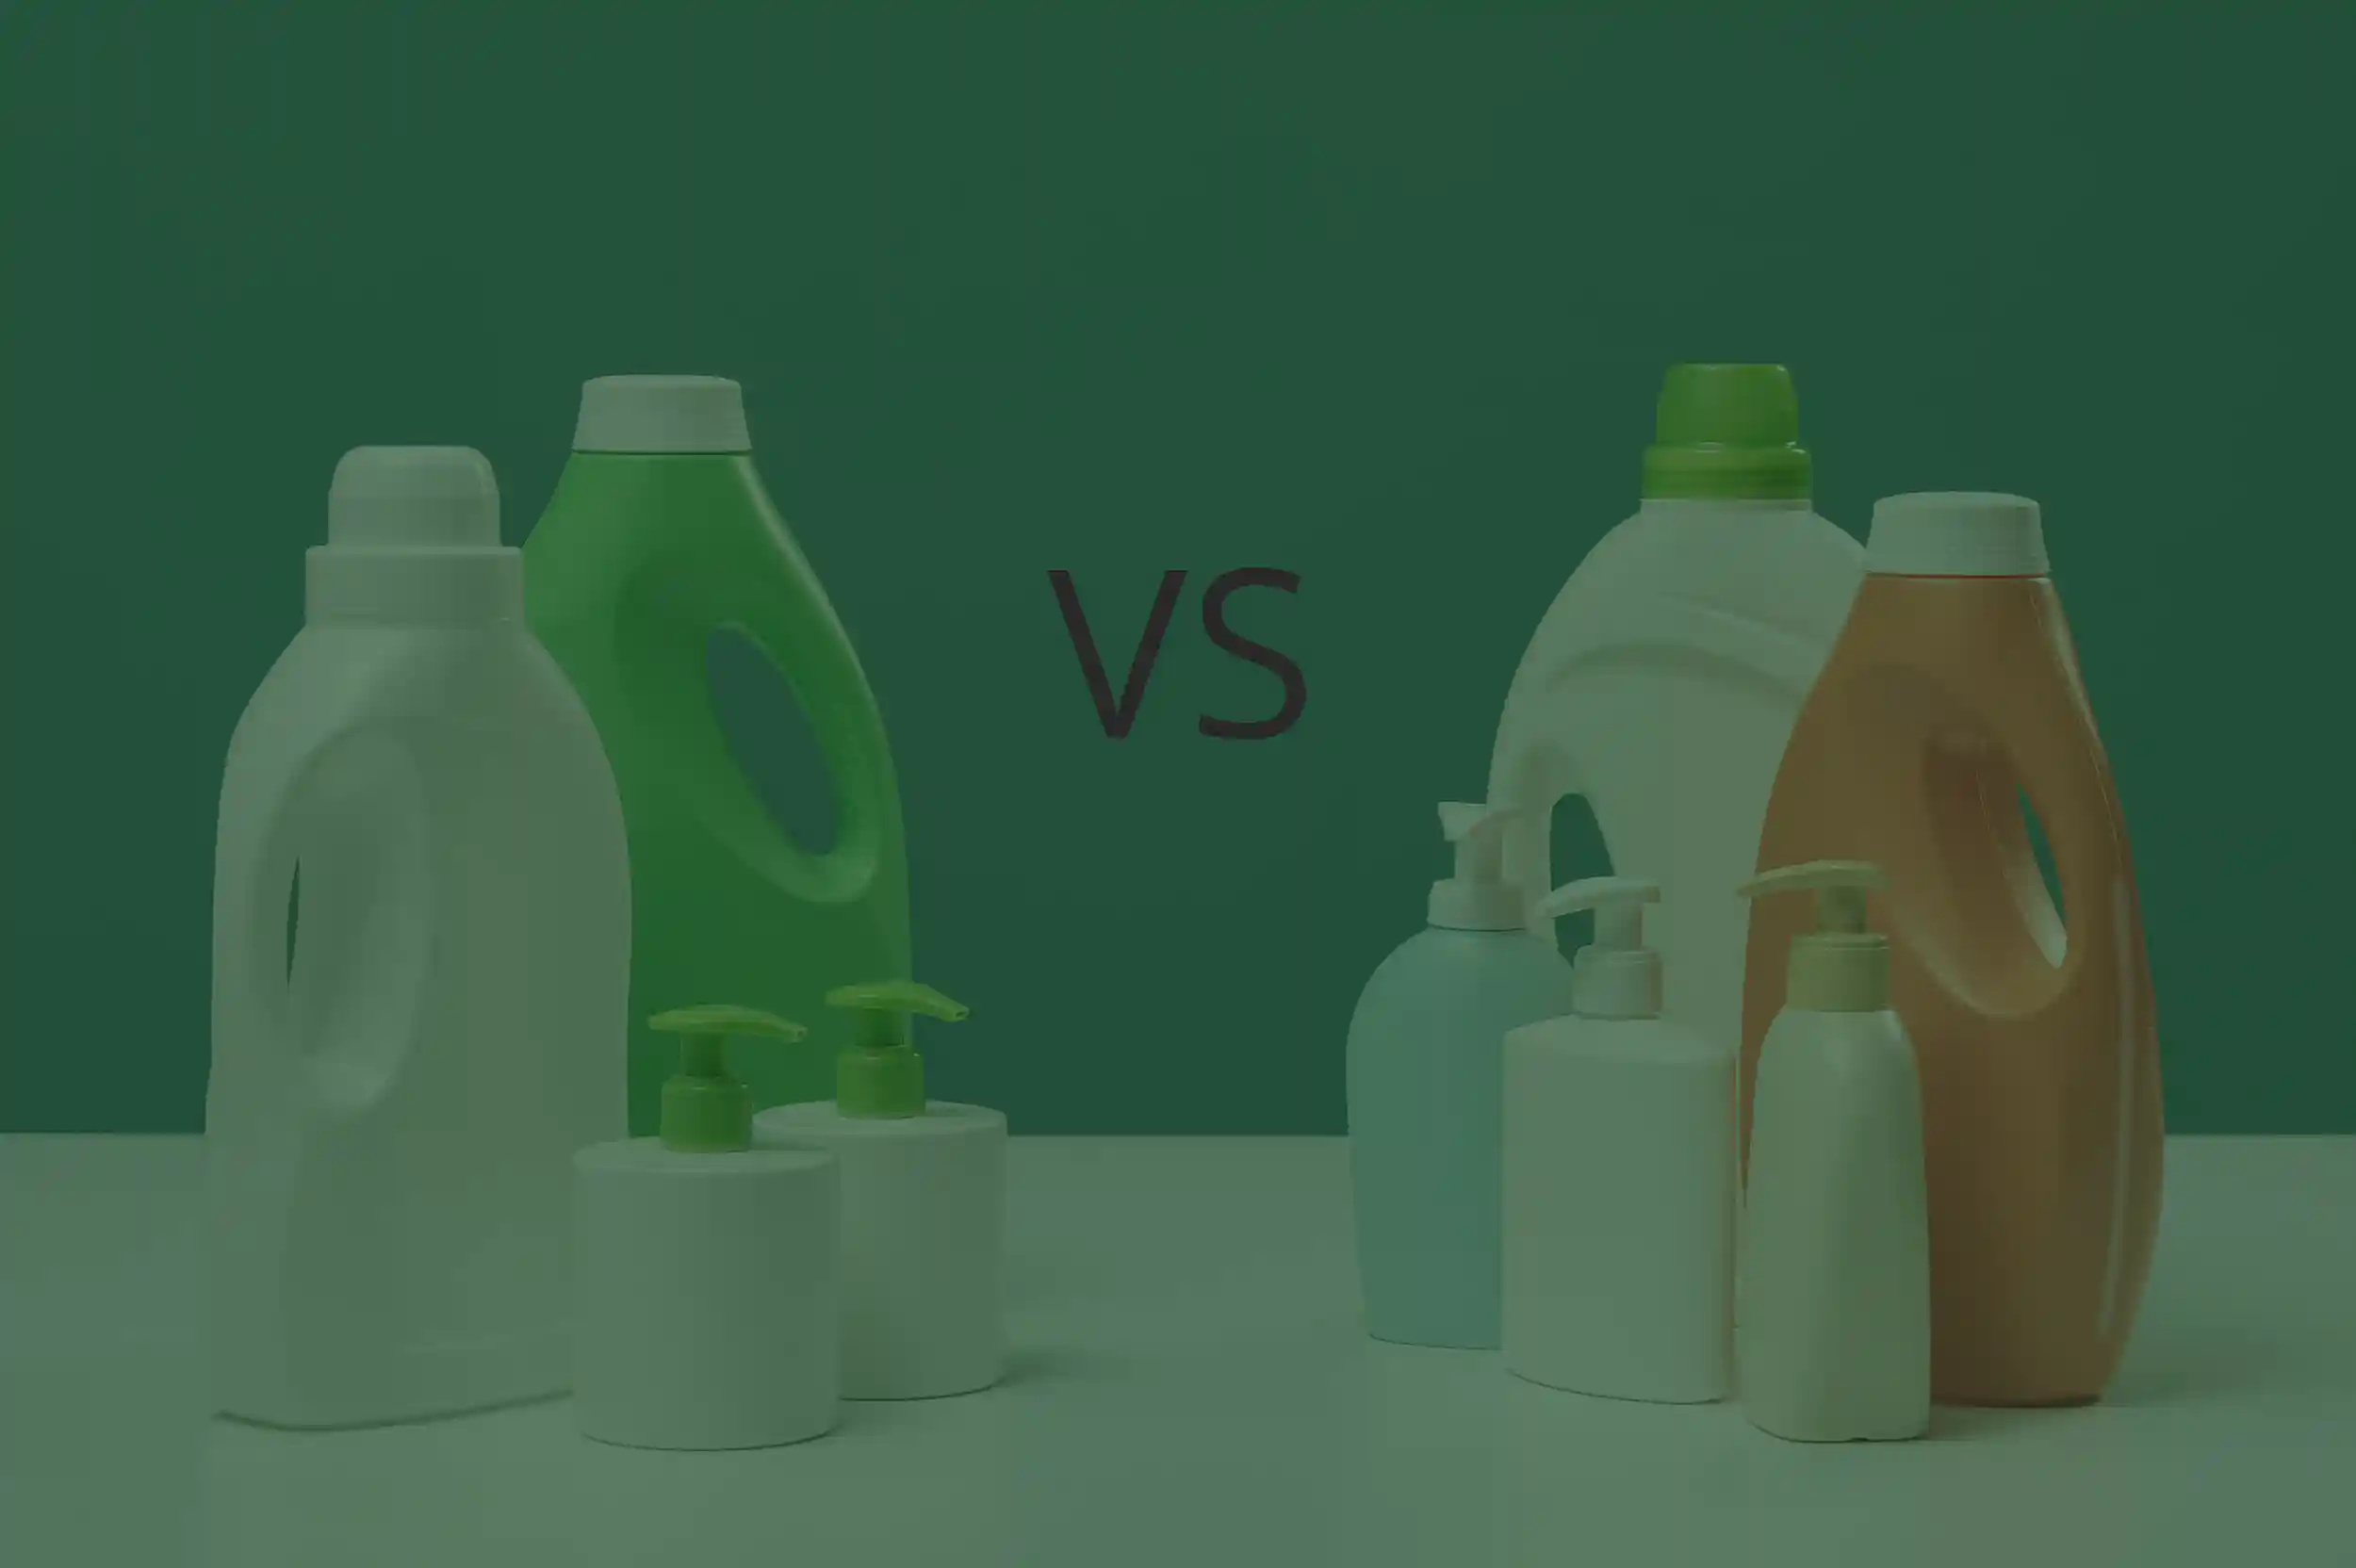 Comparing competing home-supply products via competitive analysis